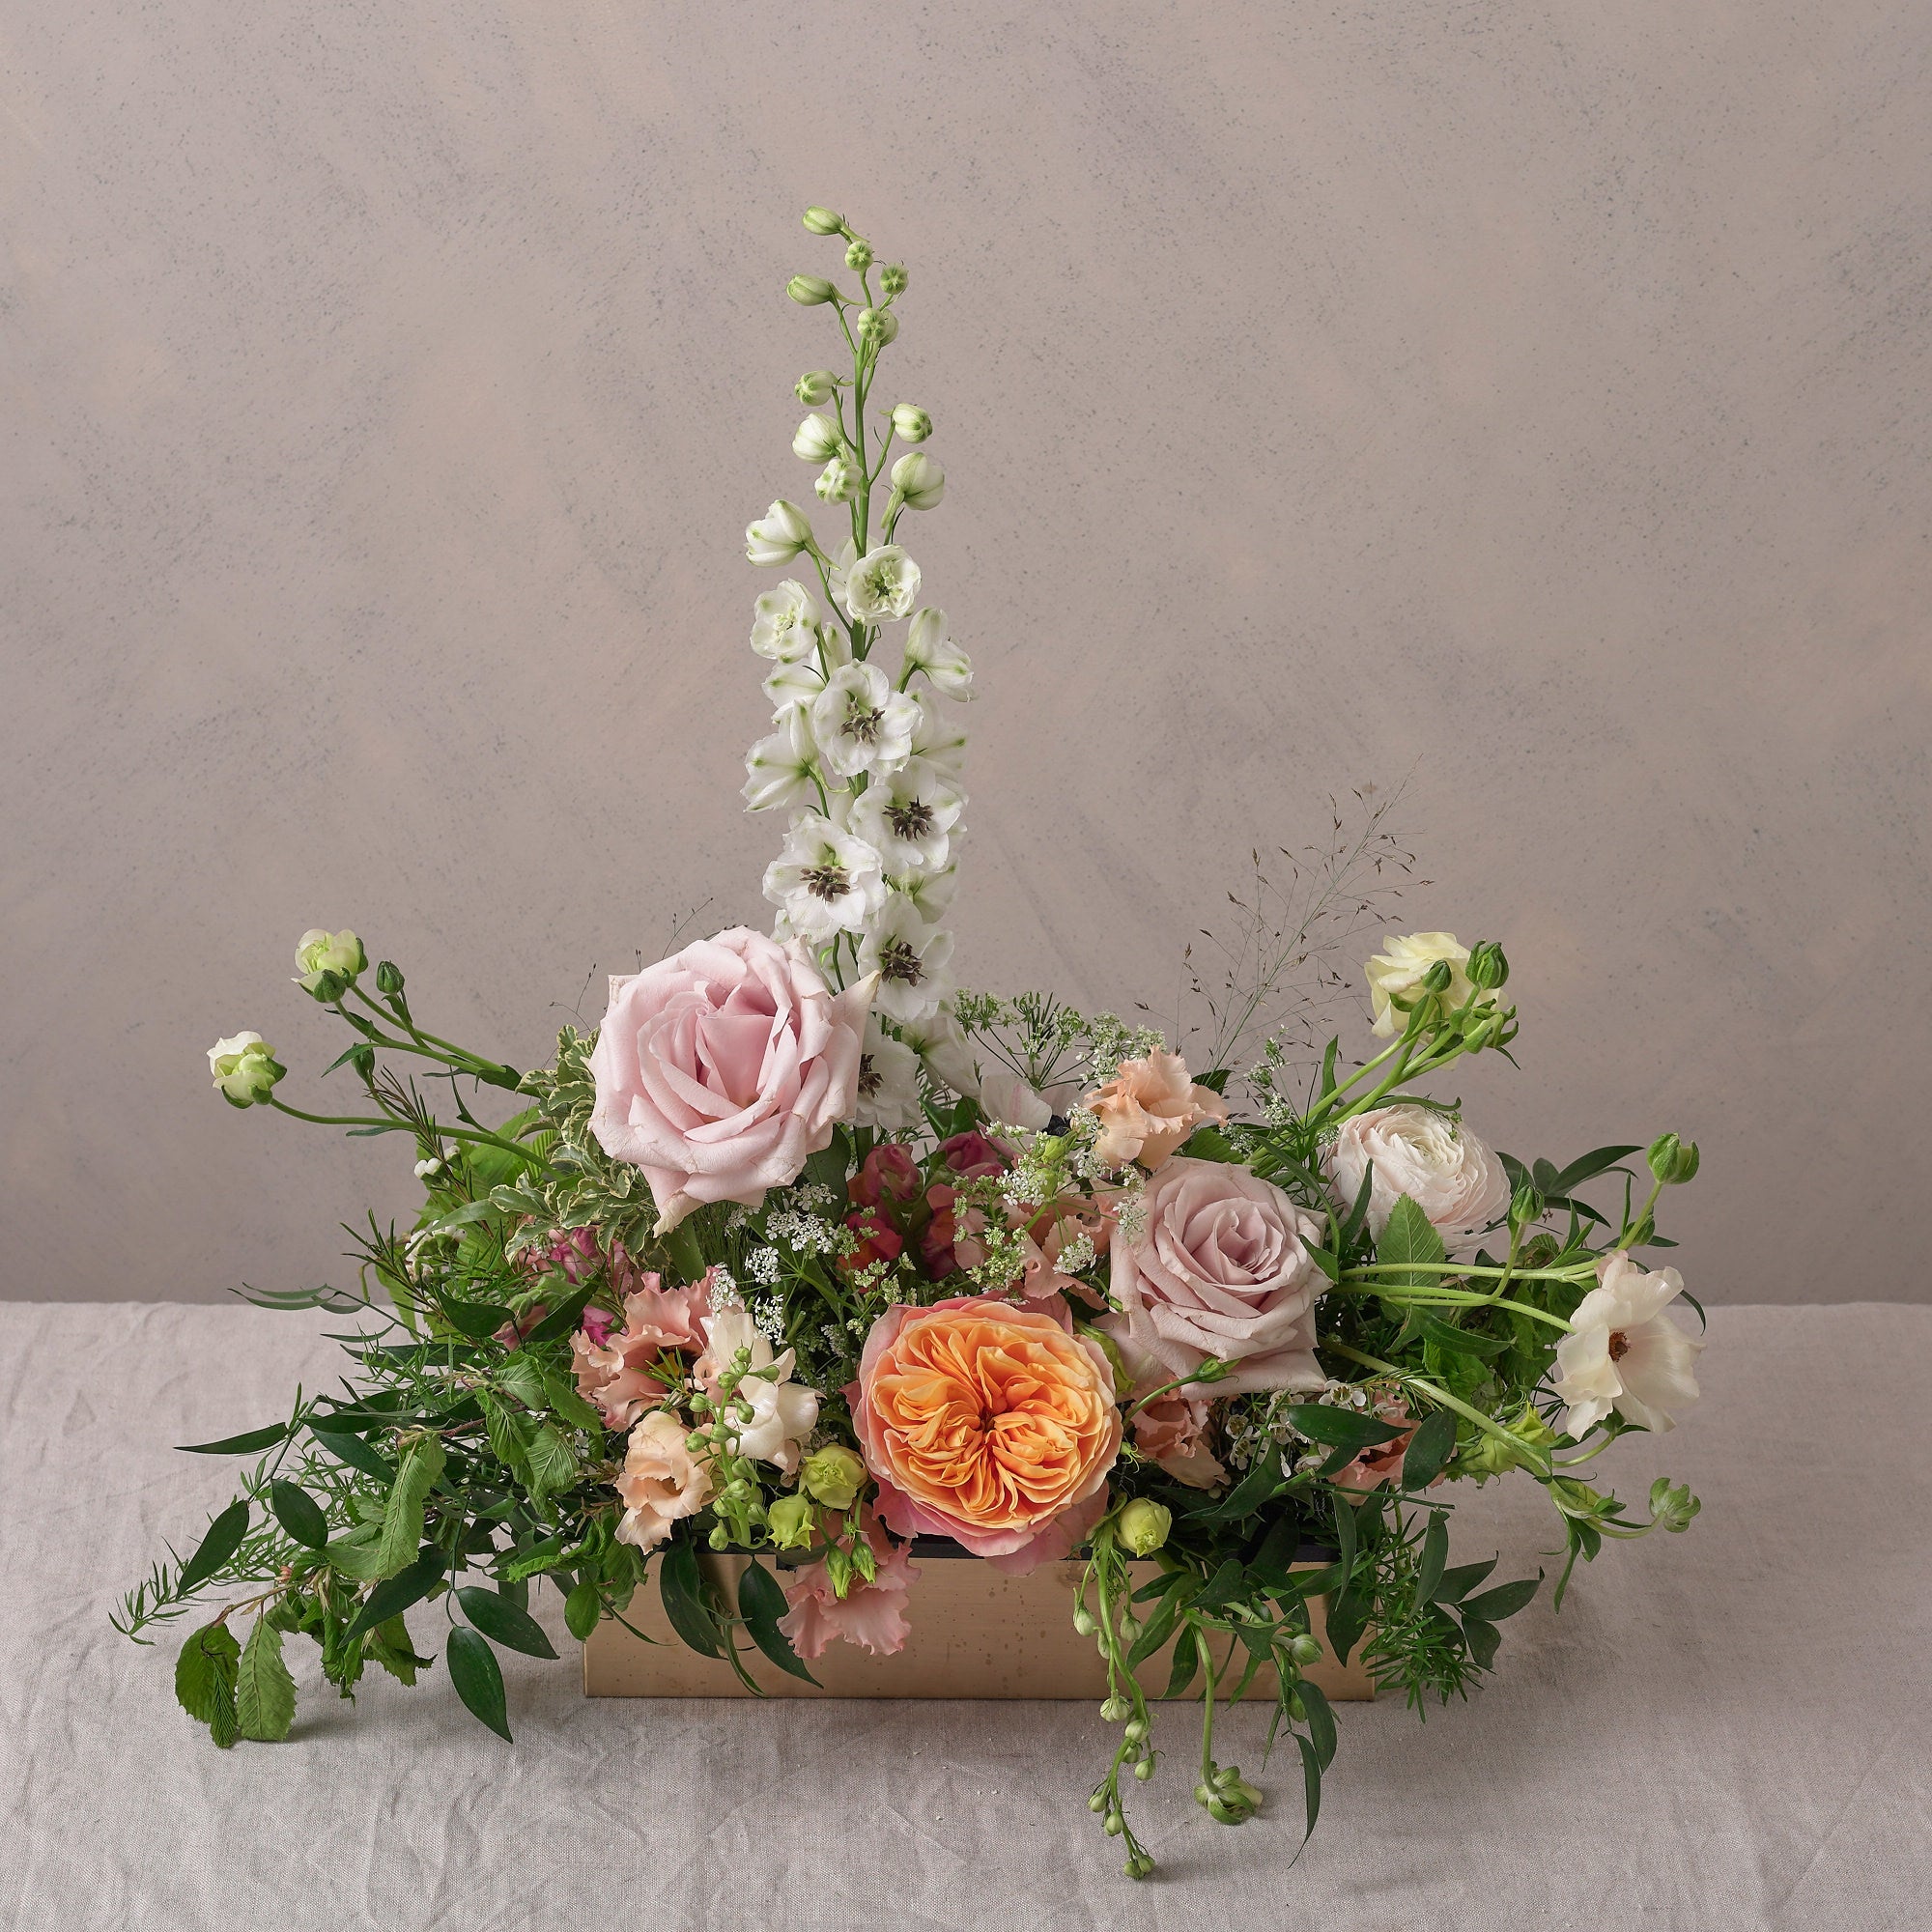 midsummer bloom trough arrangement with vibrant and fresh flowers for weddings and events